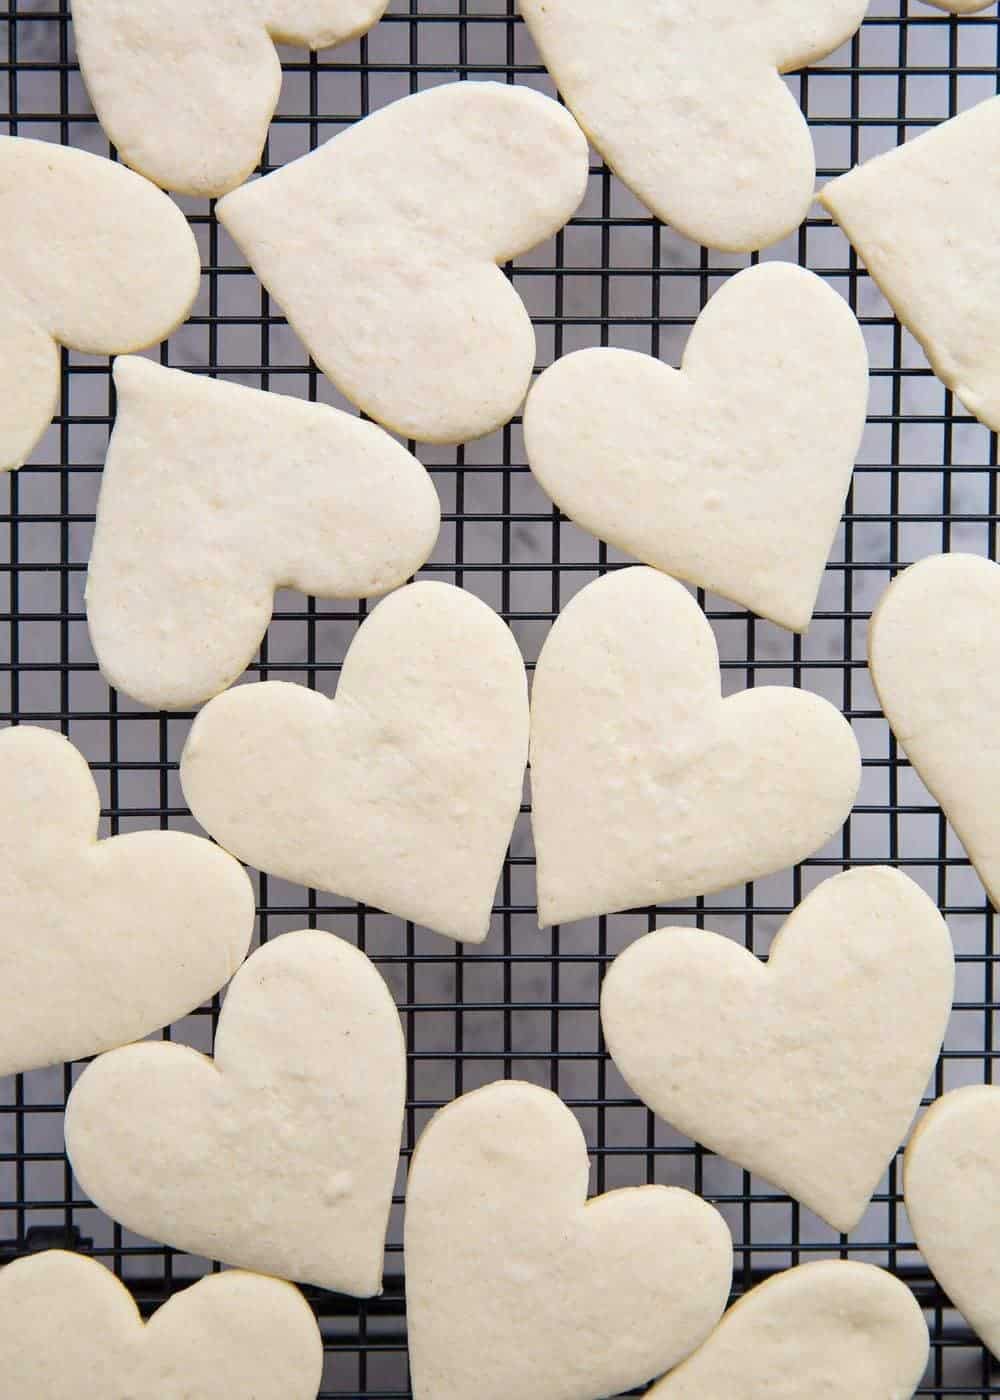 Heart shaped empire biscuits on cooling rack.